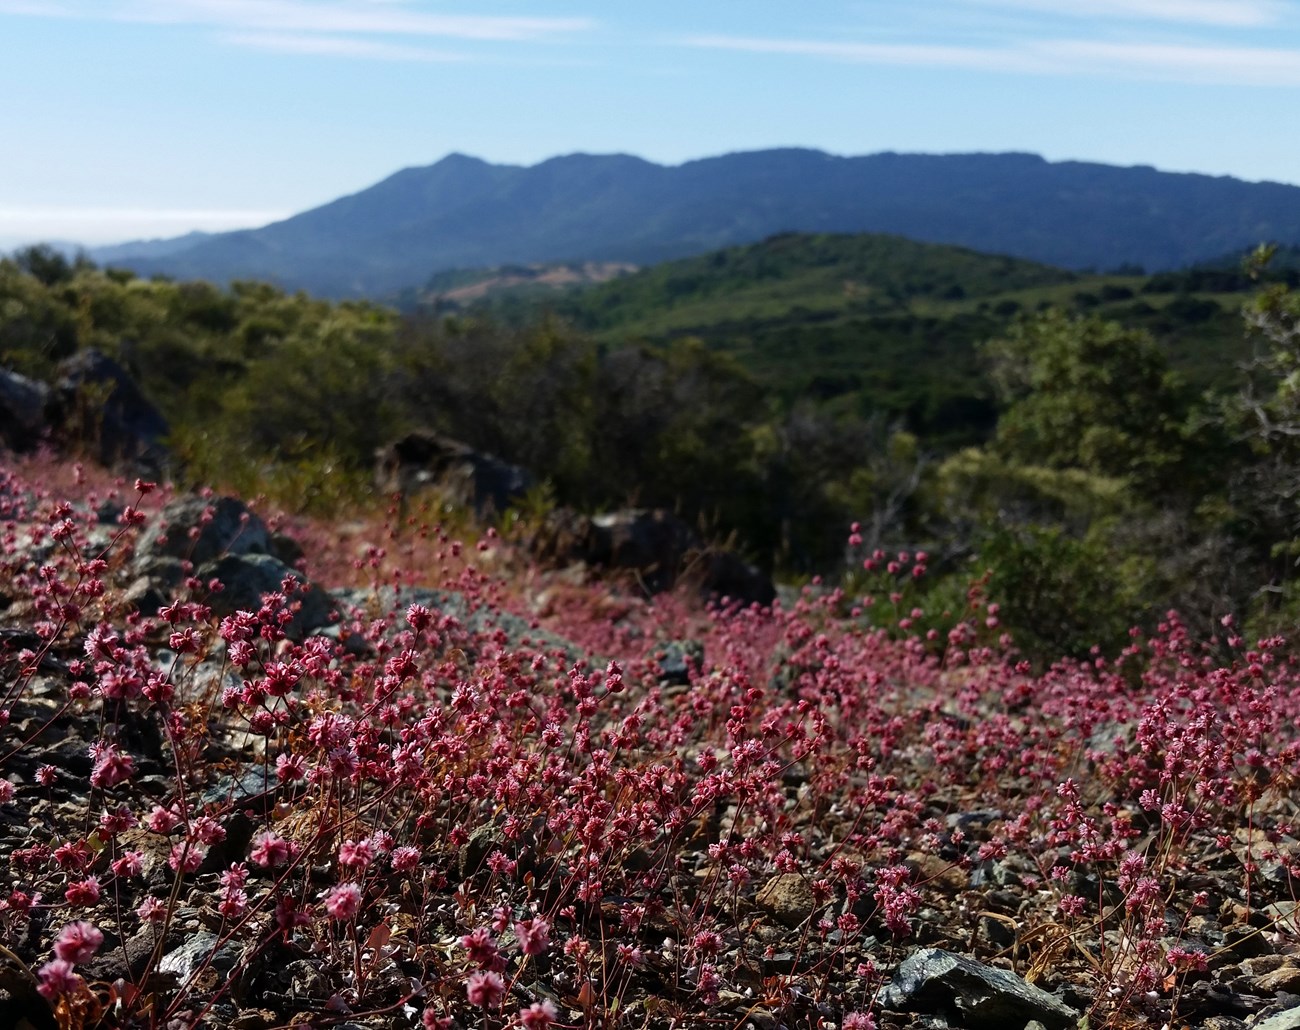 A sea of pink flowers over a rocky serpentine barren, with a view of mountains beyond.